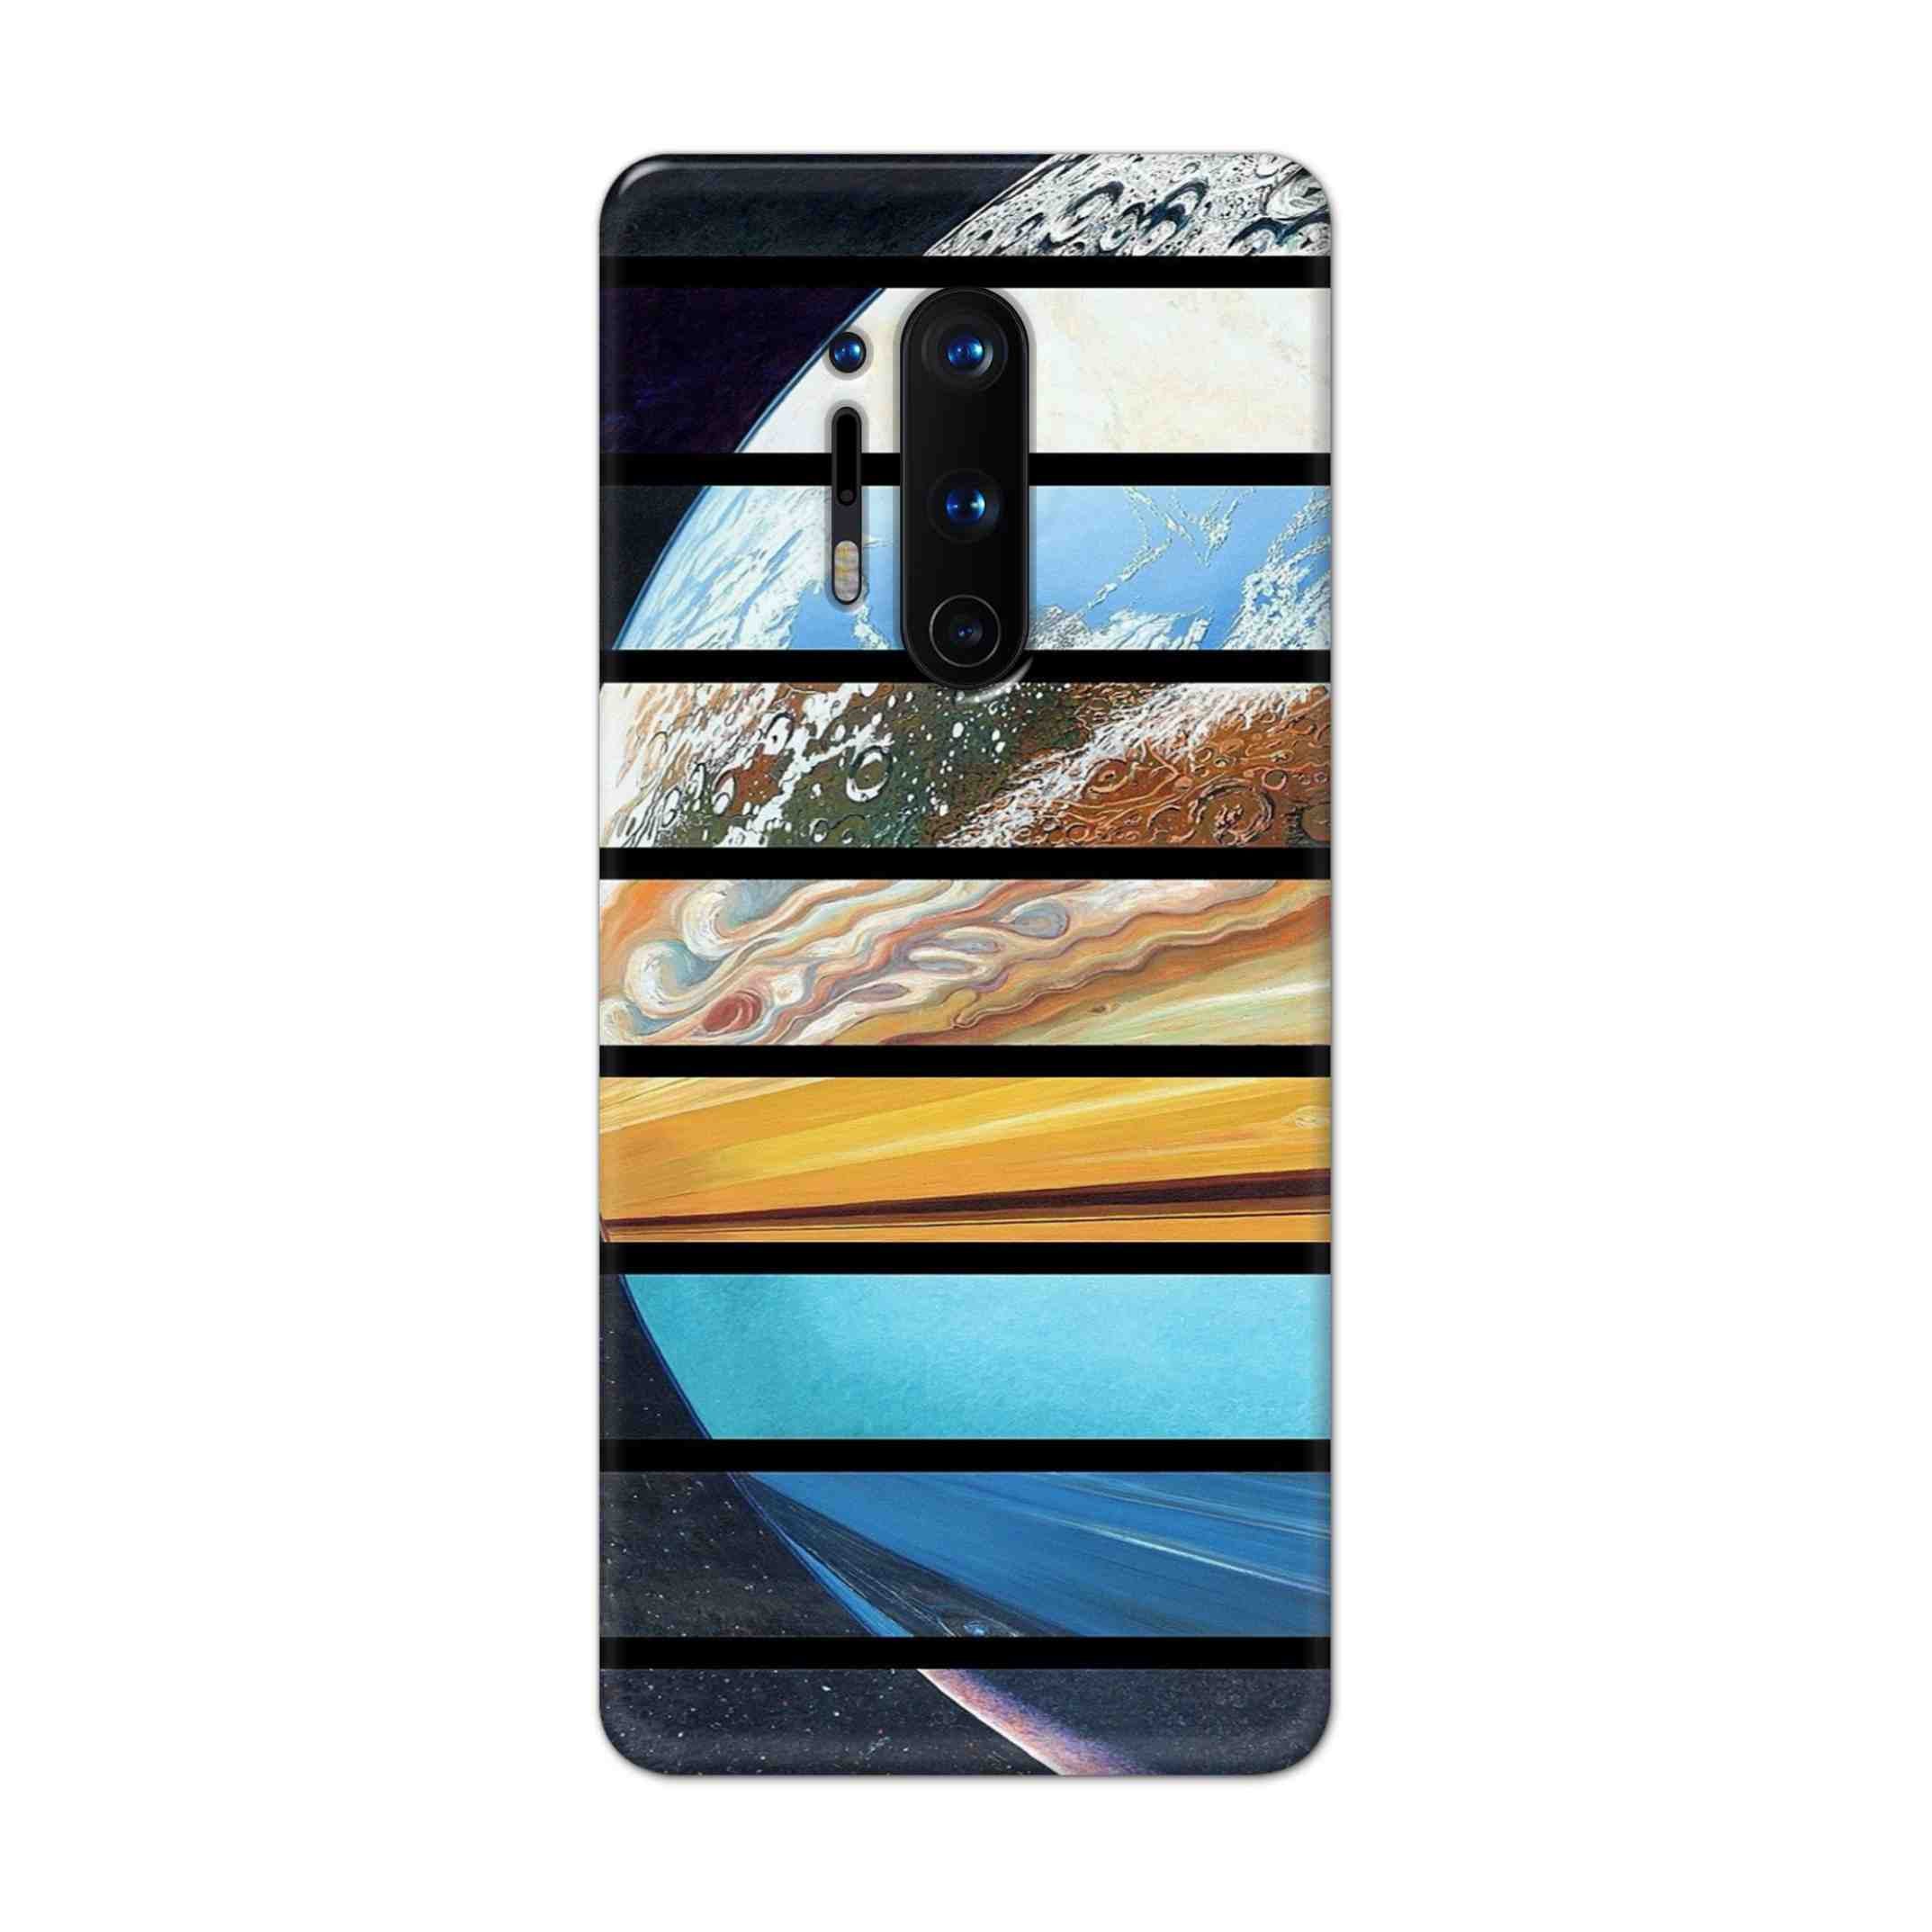 Buy Colourful Earth Hard Back Mobile Phone Case Cover For OnePlus 8 Pro Online